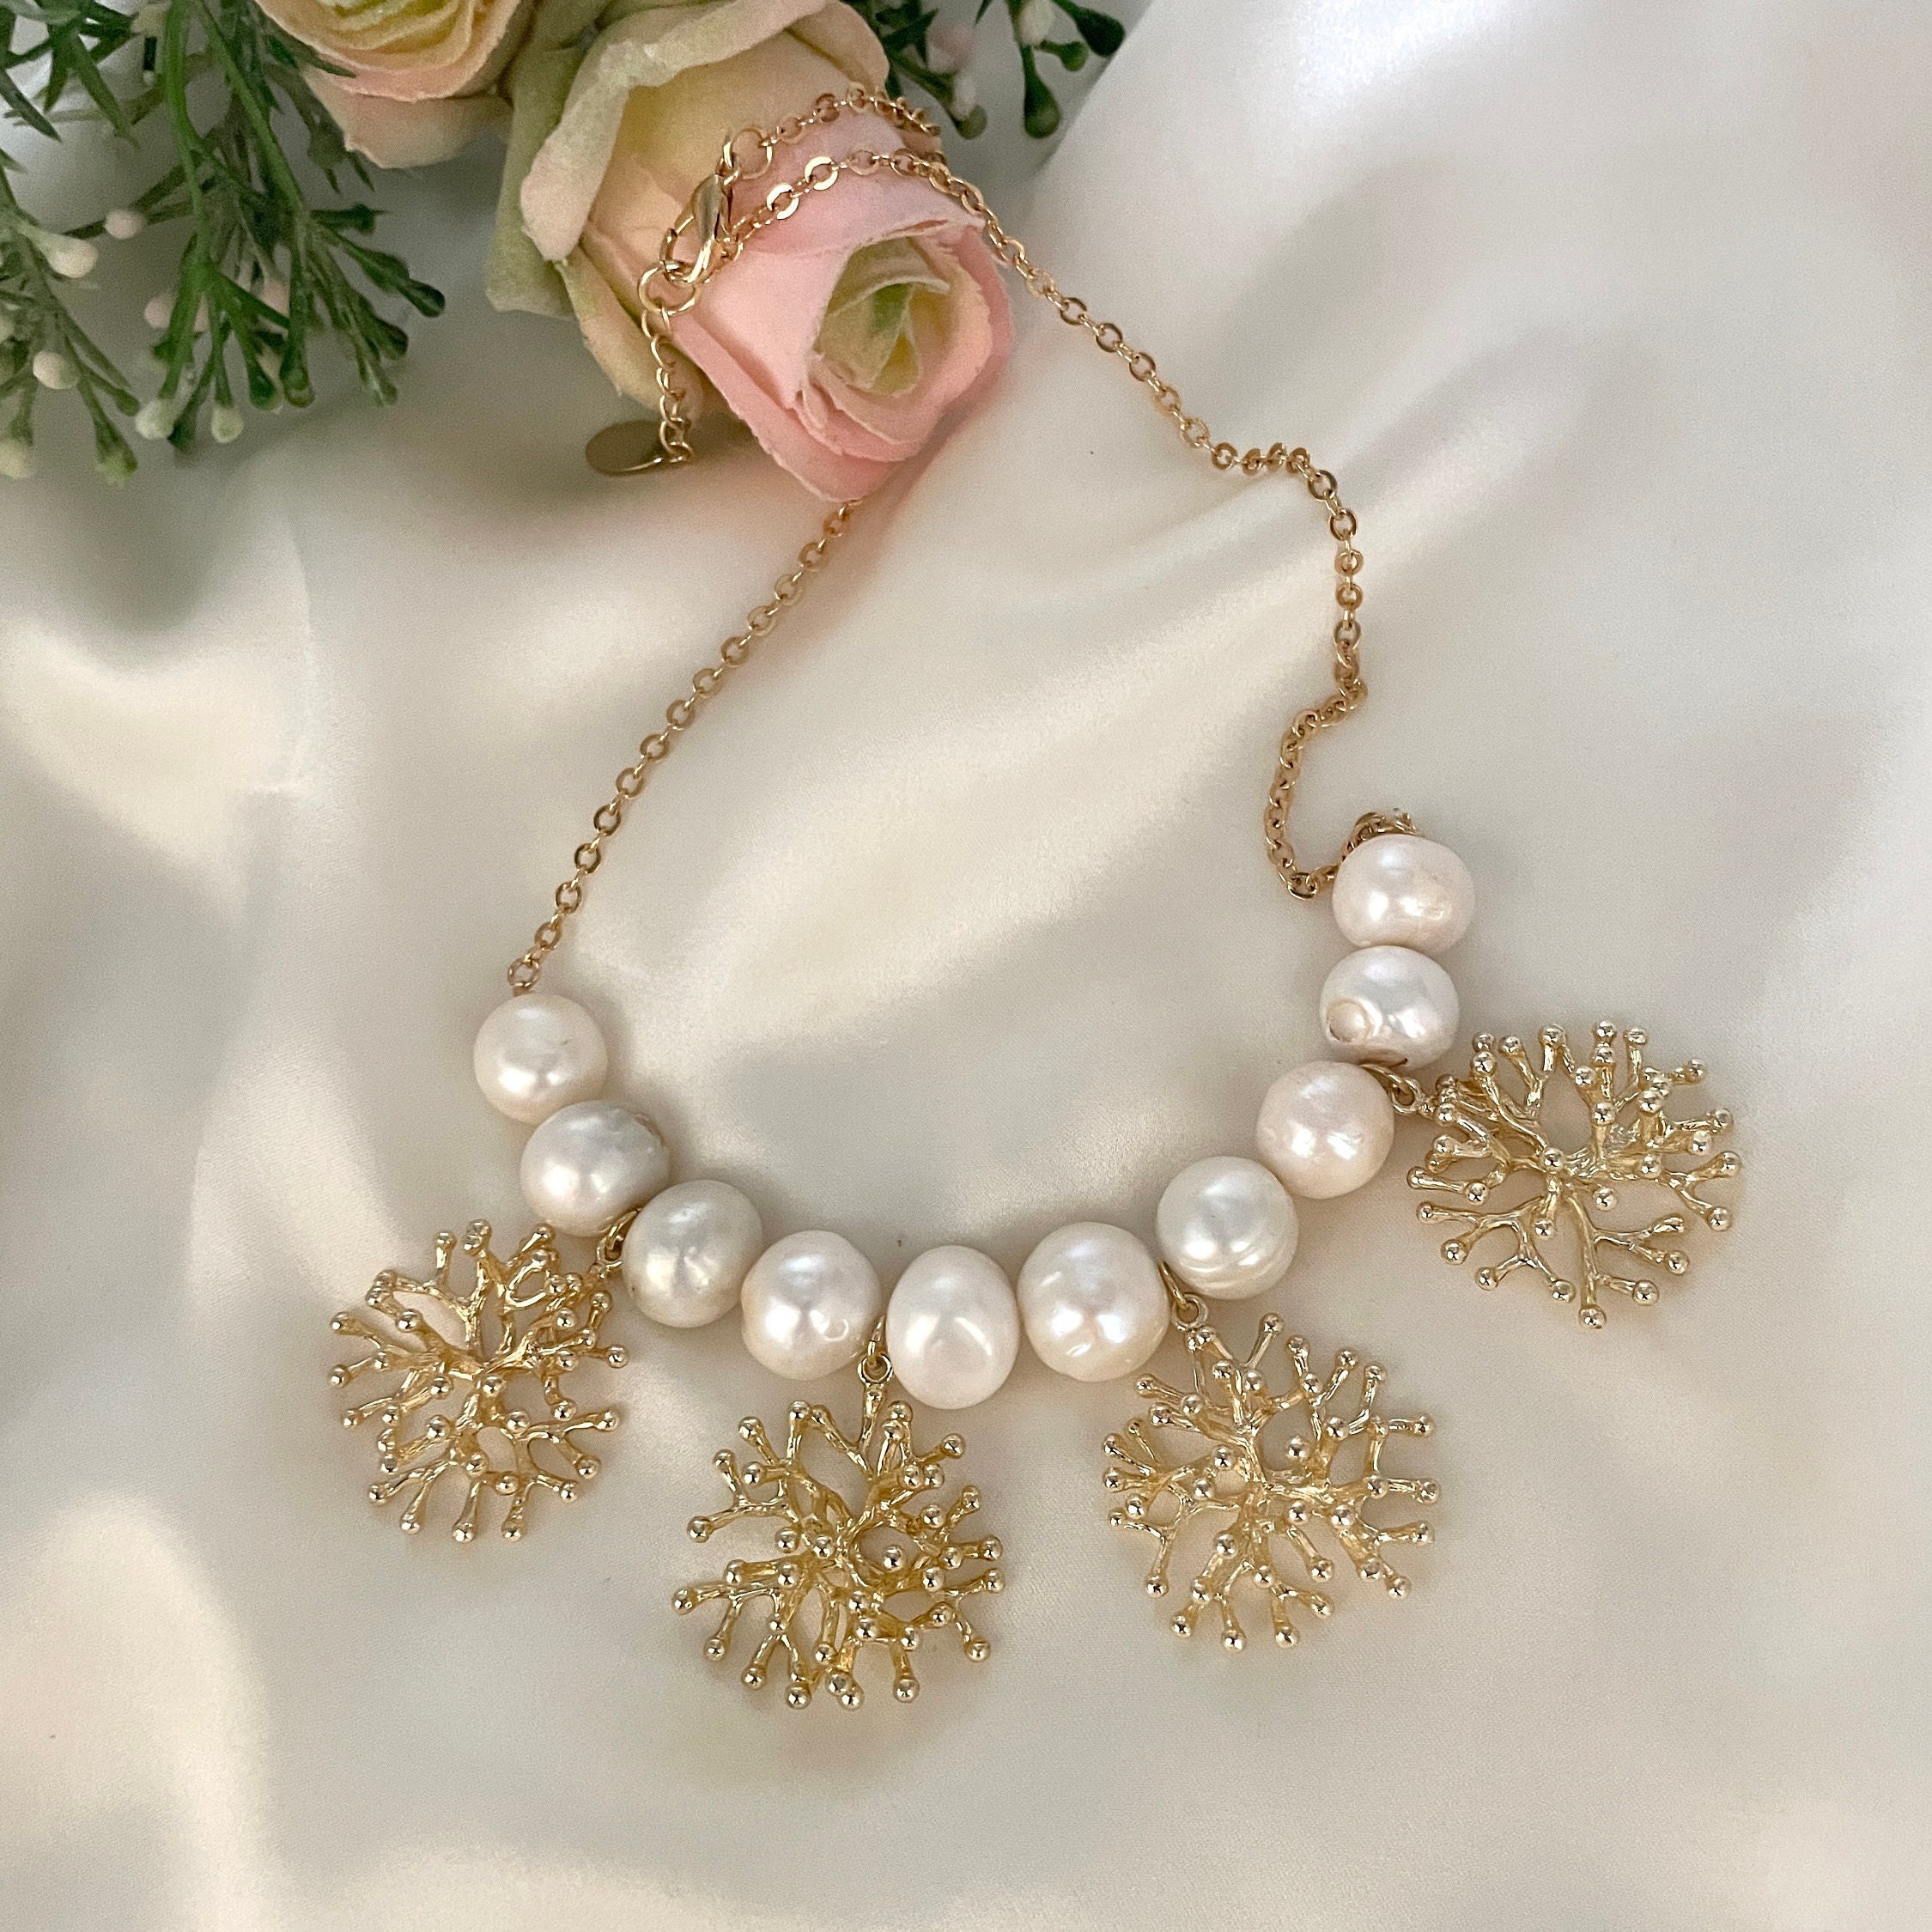 Sea Glass & Freshwater Pearl Necklace | Beach Elegance Defined